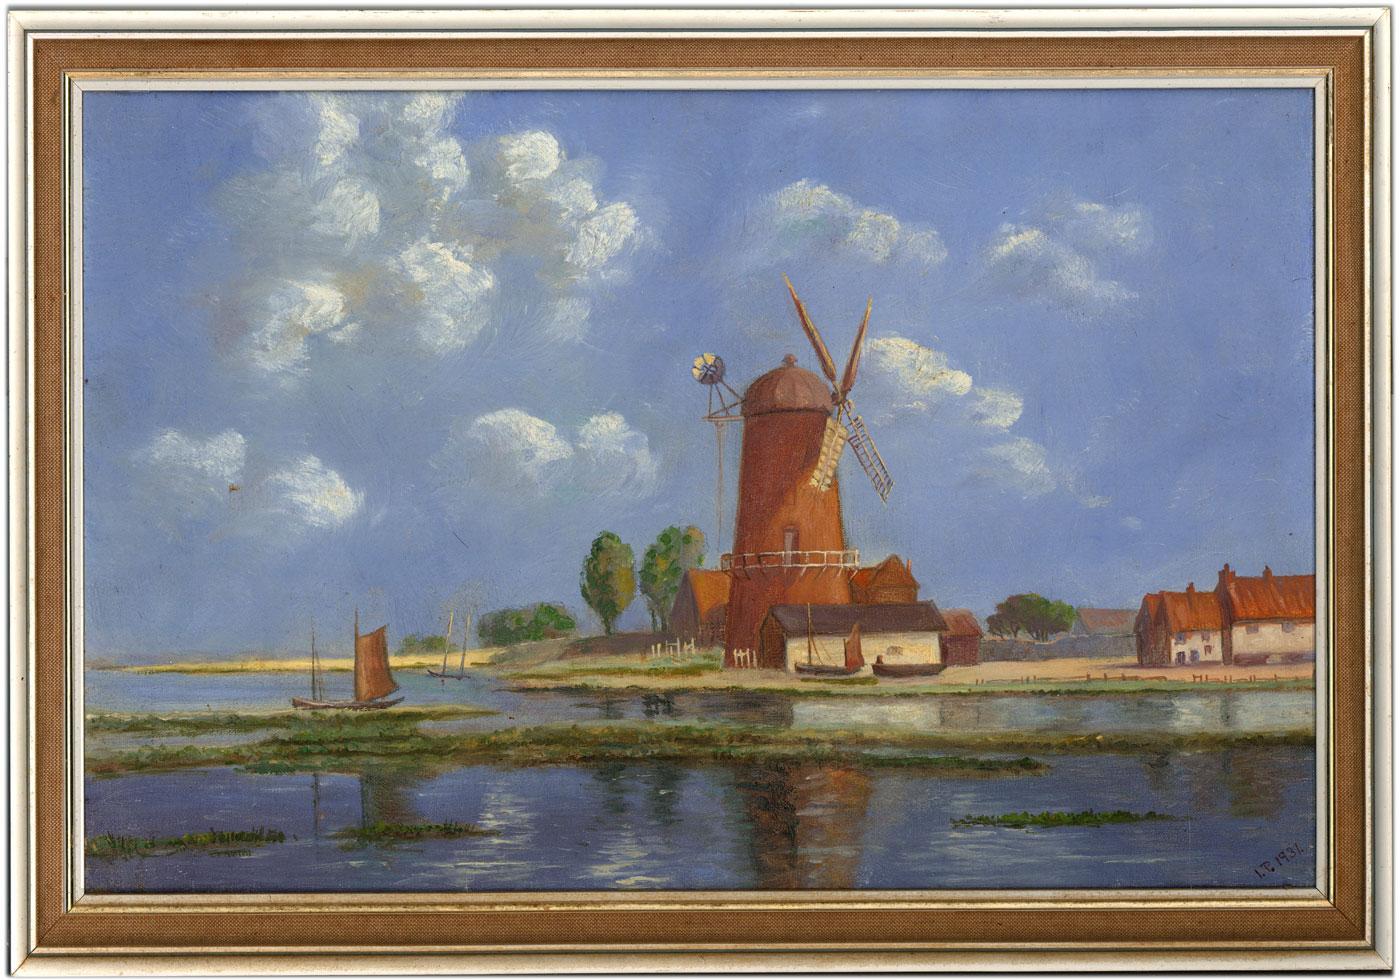 A delightful Dutch scene depicting a windmill against a coastal backdrop. Monogrammed and dated to the lower right corner of the artwork. Signed and inscribed 'Dutch Scene' on the reverse. Presented in a modern frame with woven detail. On canvas.